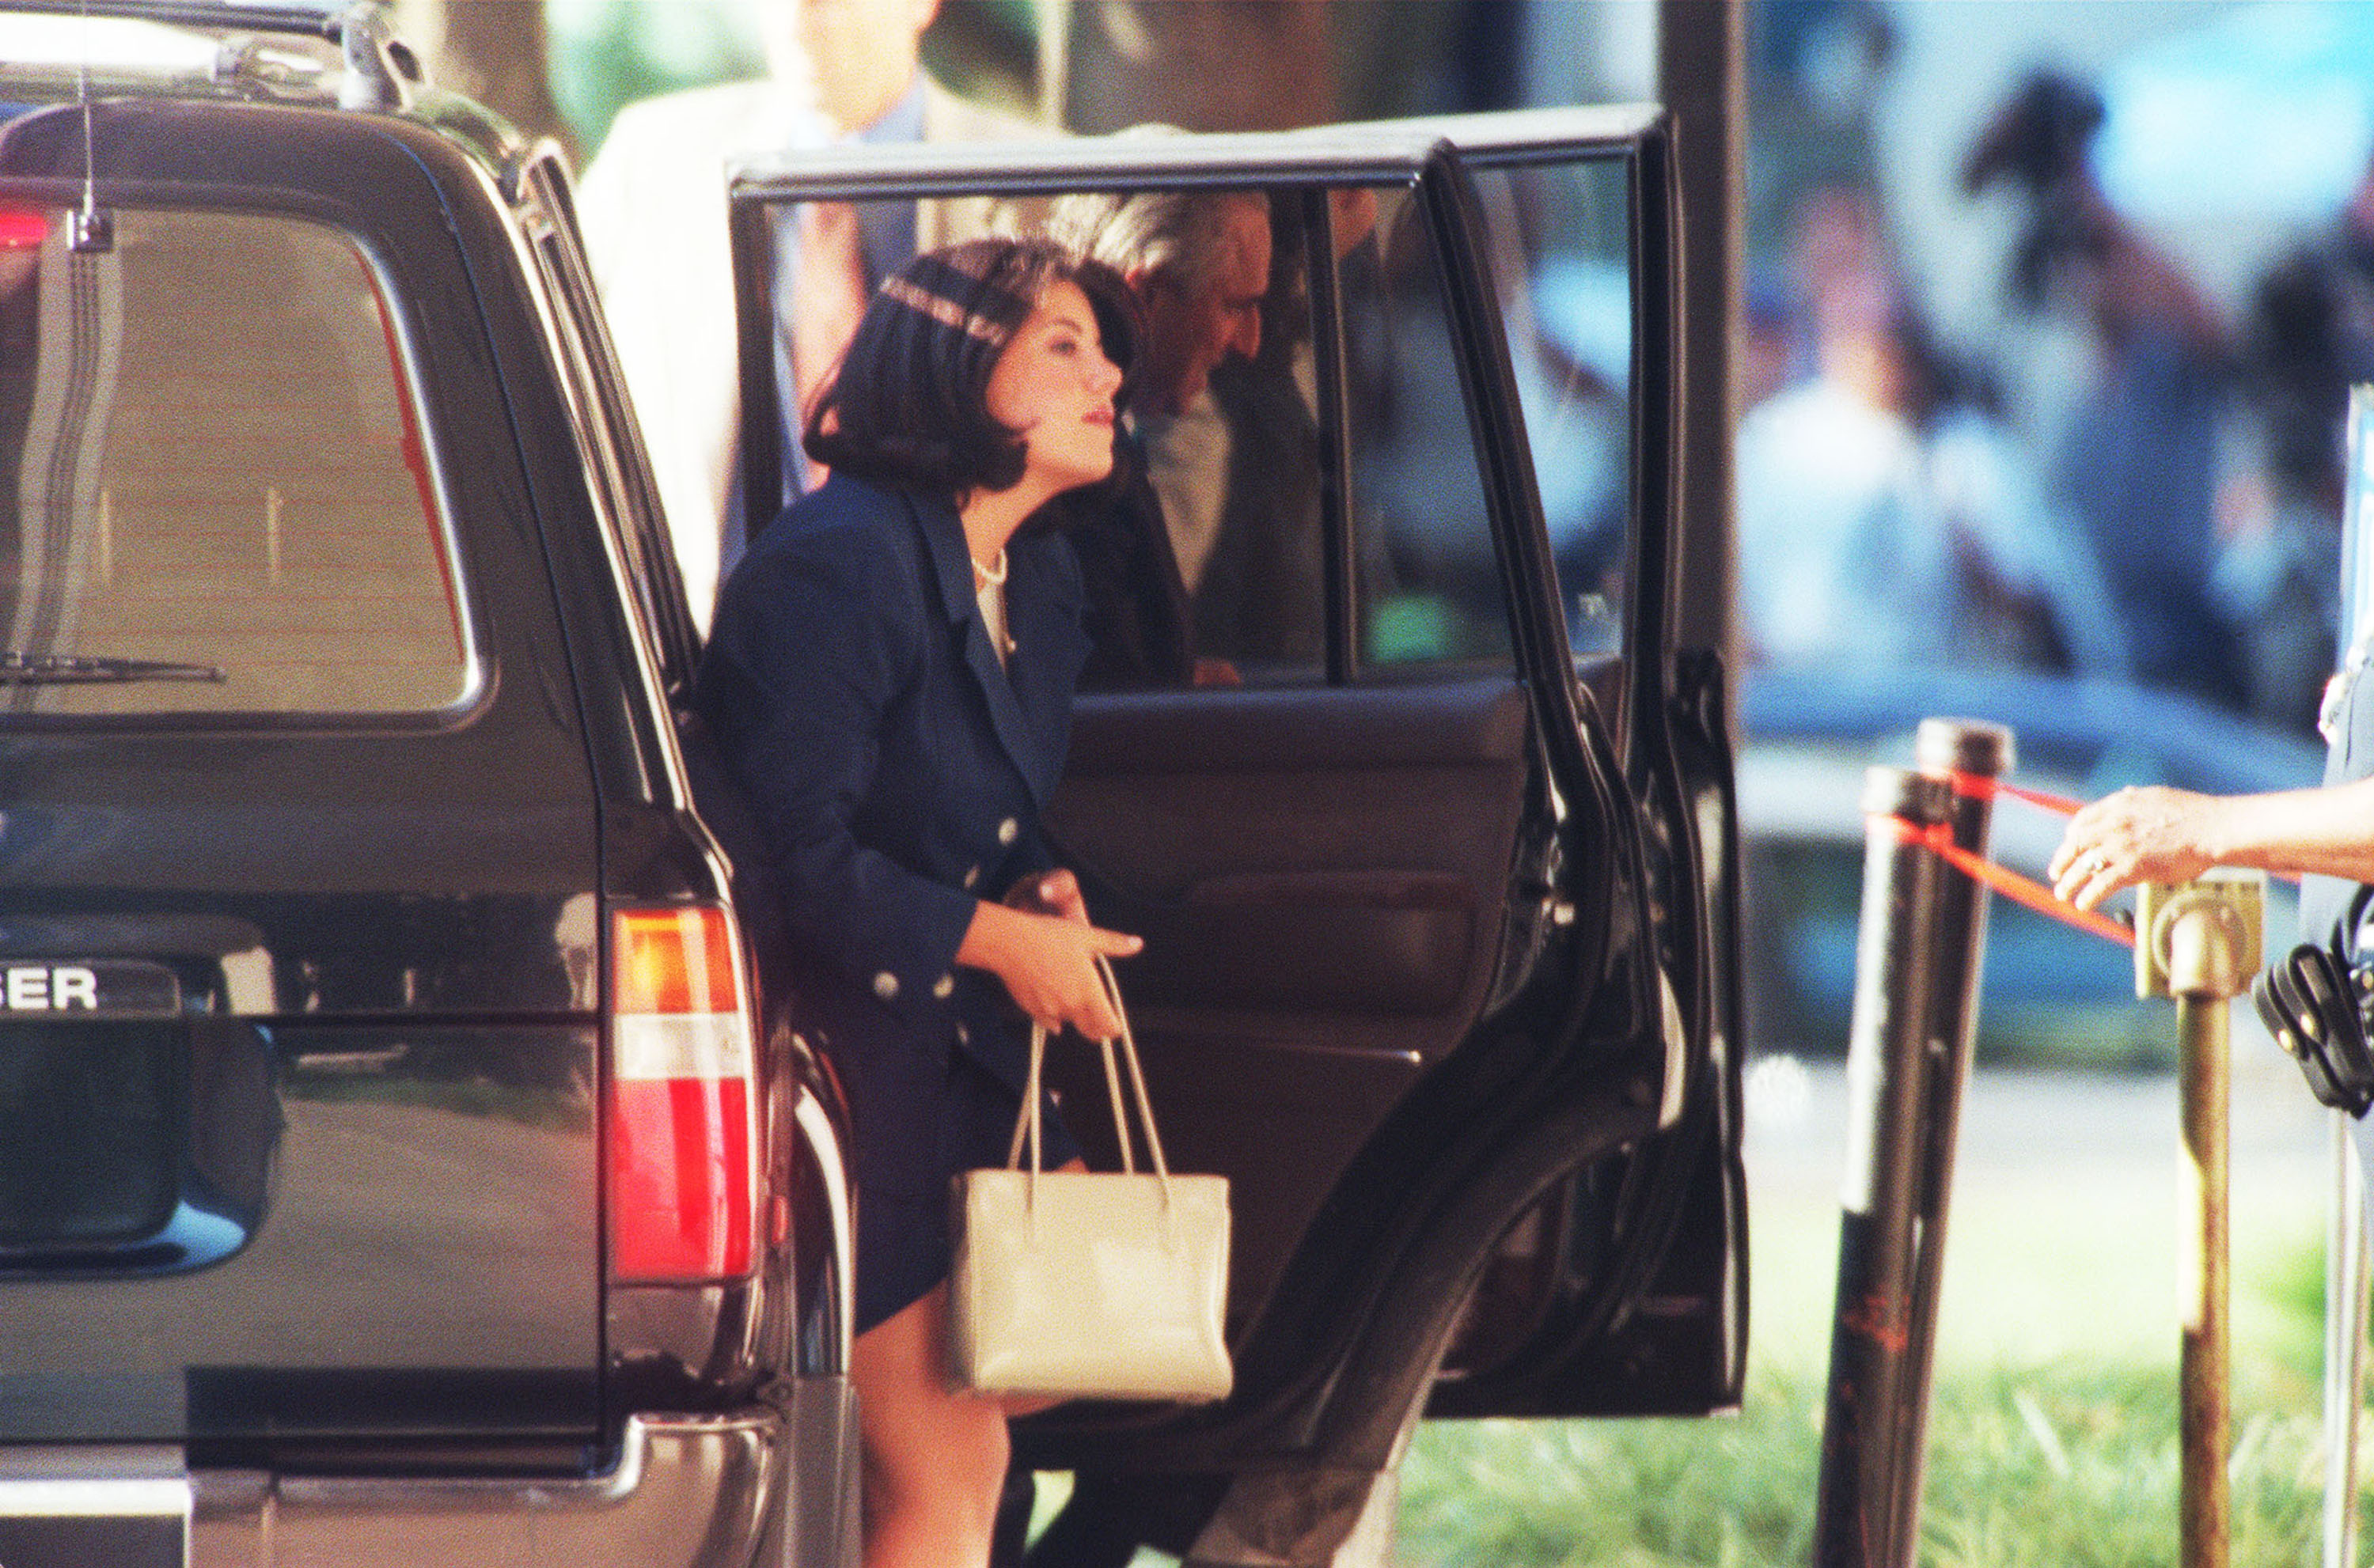 Monica Lewinsky arriving at the US District Courthouse in on August 6, 1998 in Washington, D.C. | Source: Getty Images